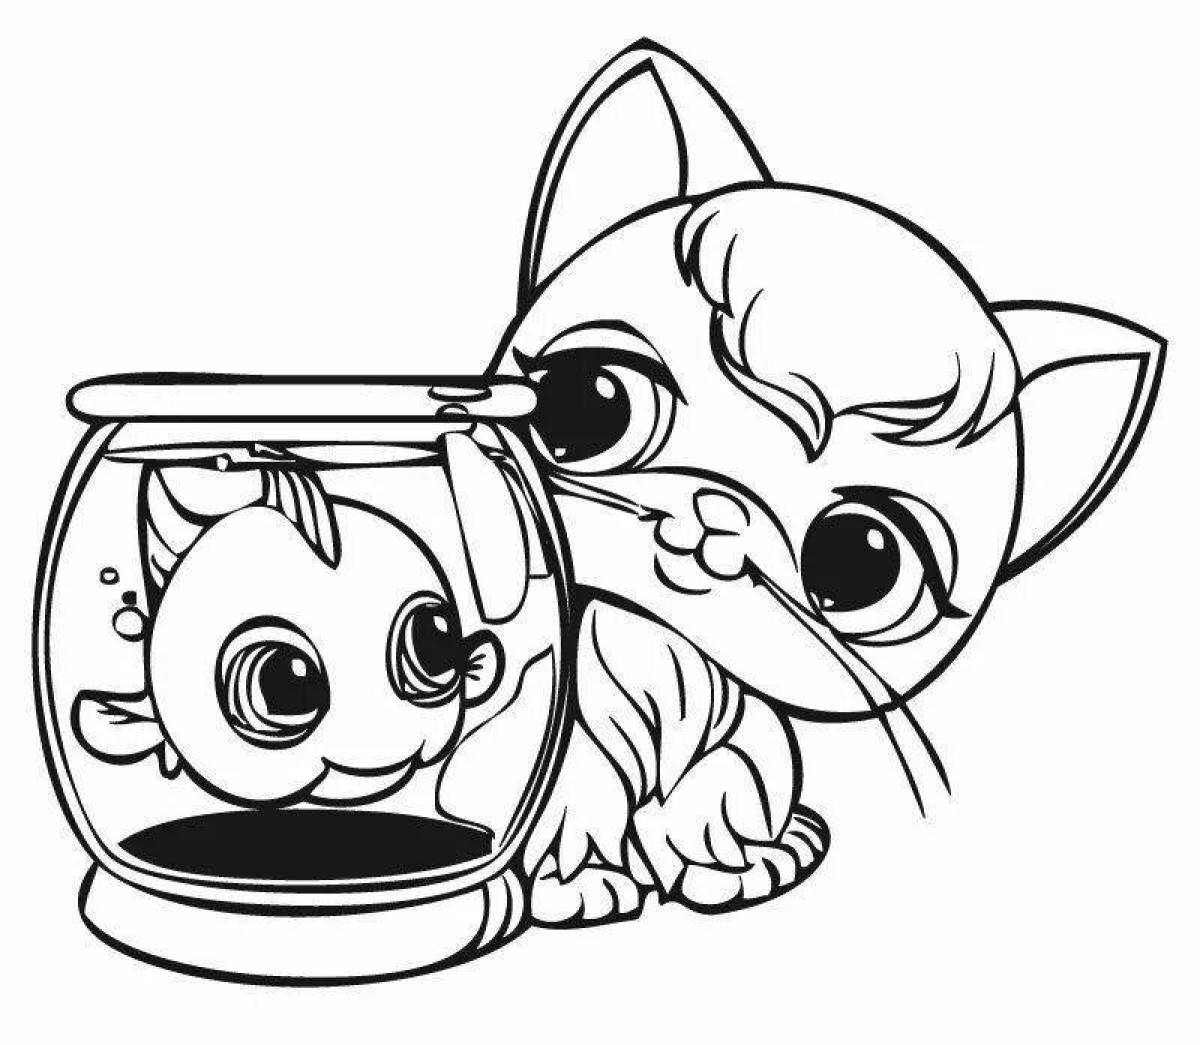 Cute and sweet cat coloring book